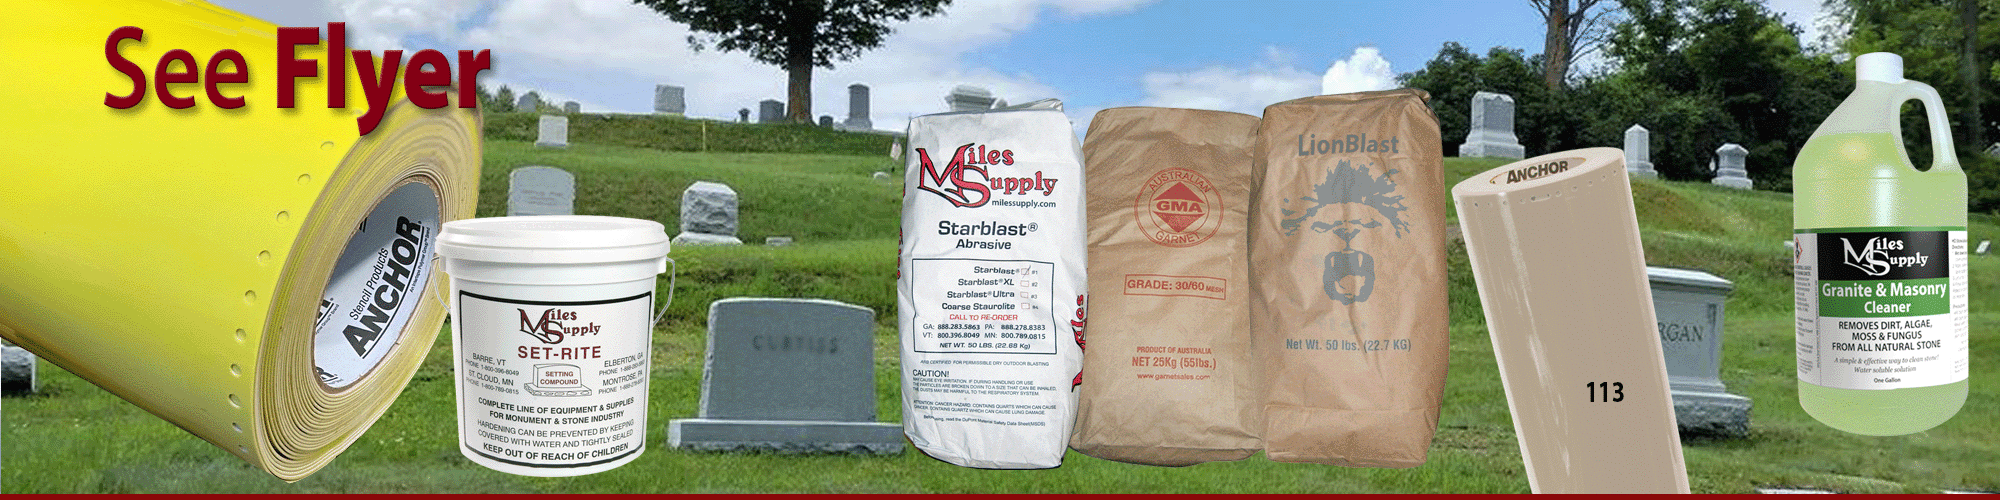 Get your stone sandblast supplies for Spring for cemetery work and sandblasting